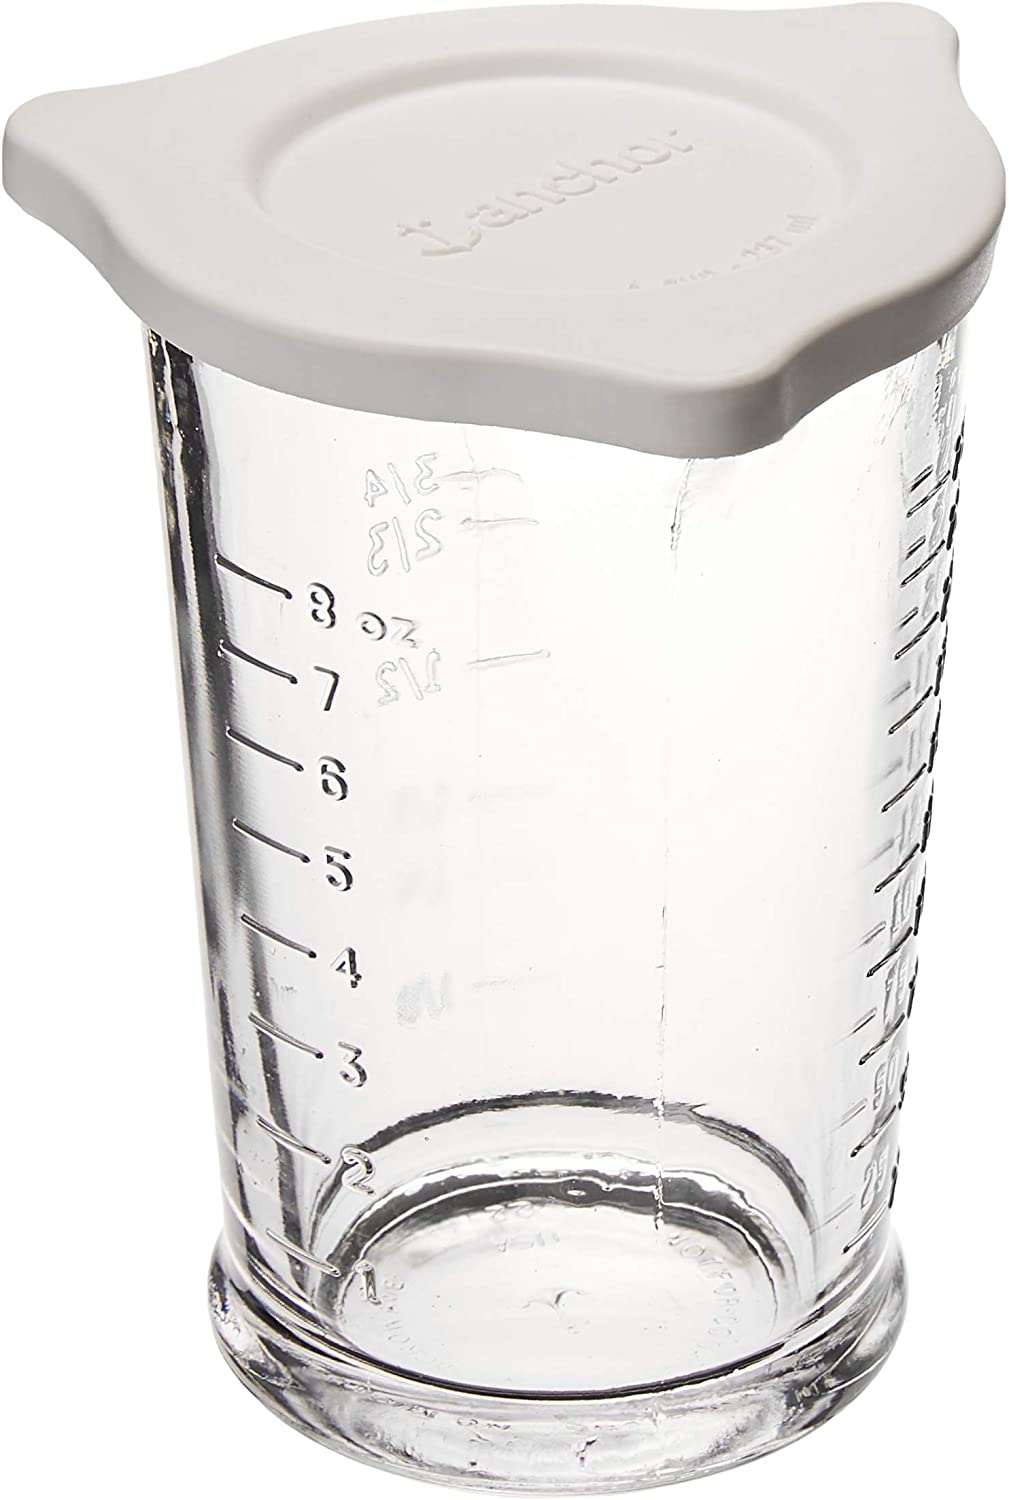 Anchor Hocking 8oz Triple Pour Measuring Cup – The Happy Cook